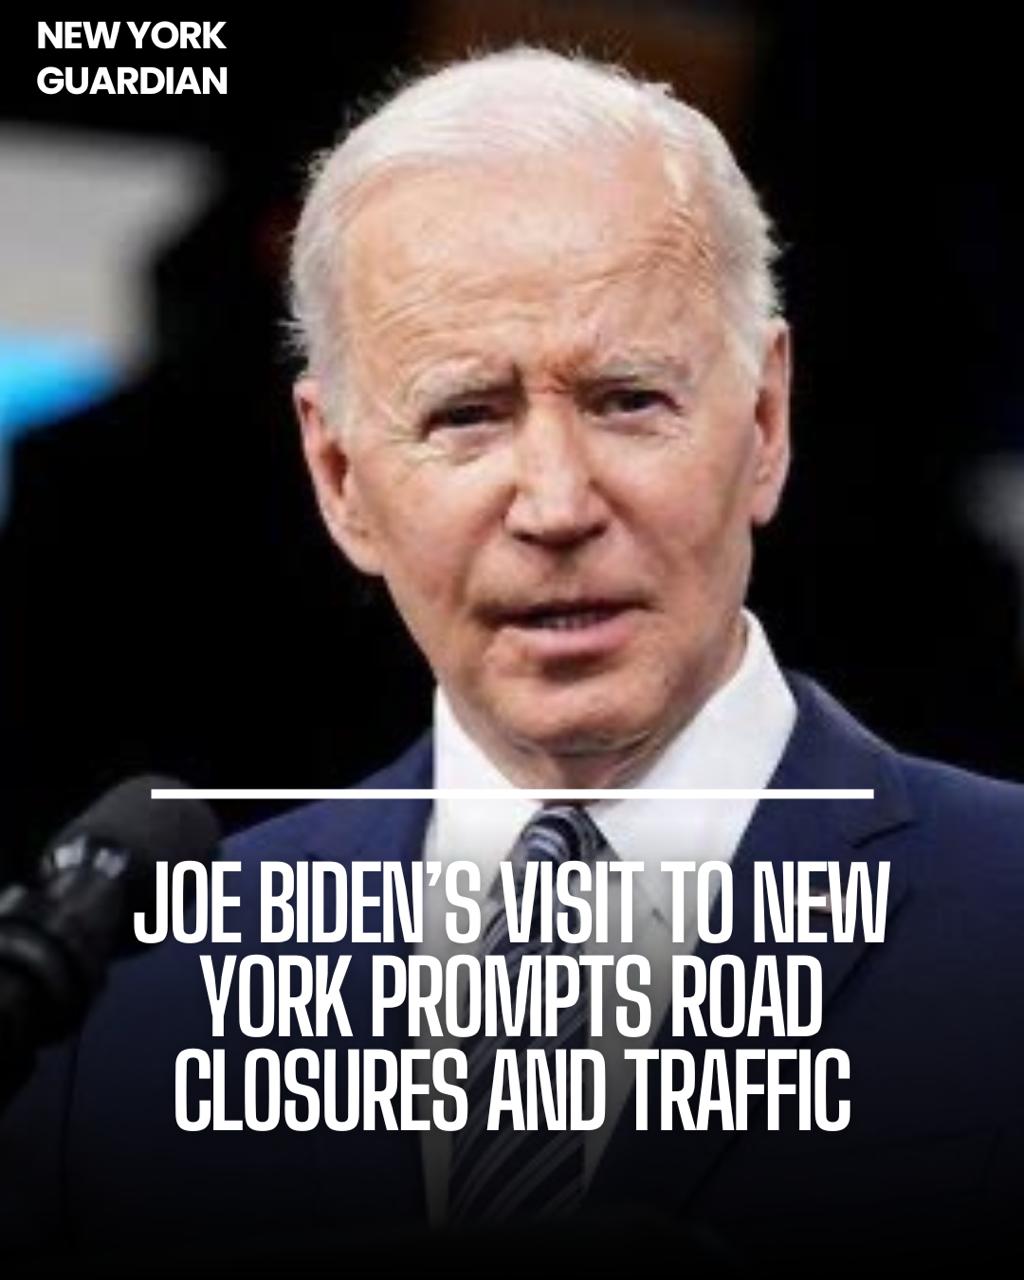 President Joe Biden will visit New York City on Wednesday to attend what the White House defines as three campaign receptions.